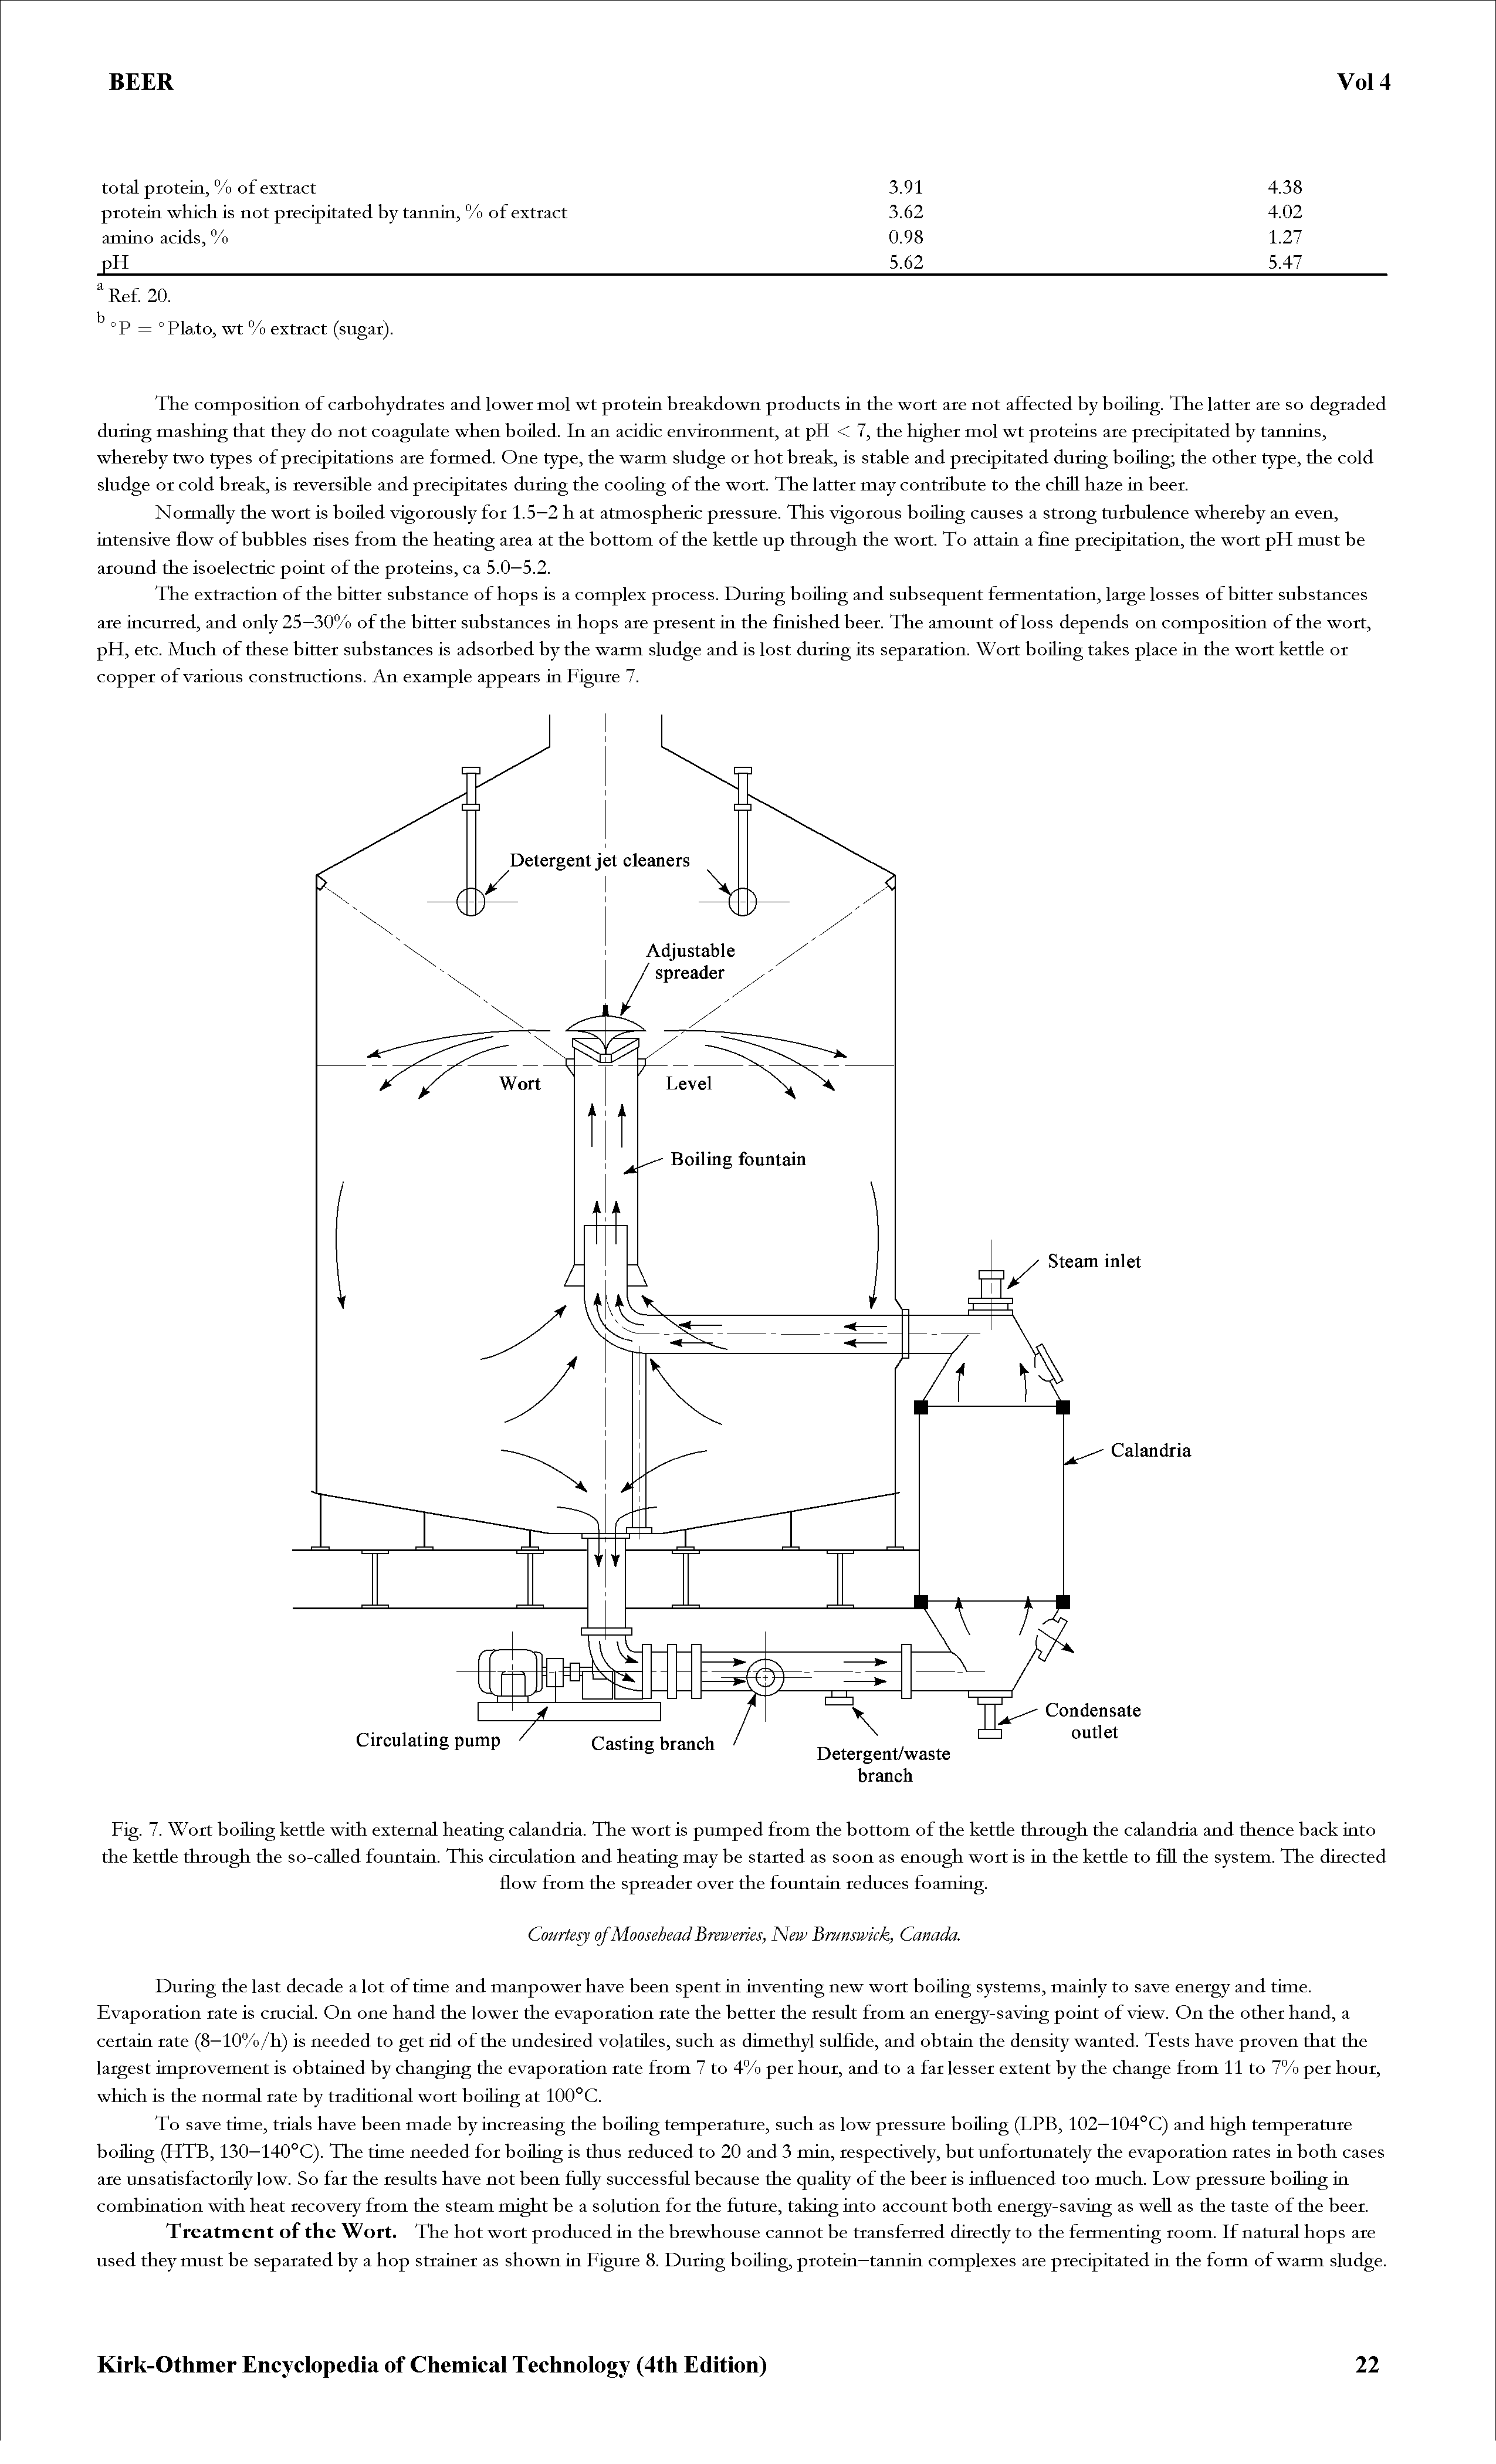 Fig. 7. Wort boiling ketde with external heating calandria. The wort is pumped from the bottom of the ketde through the calandria and thence back into the ketde through the so-called fountain. This circulation and heating may be started as soon as enough wort is in the ketde to fill the system. The directed...